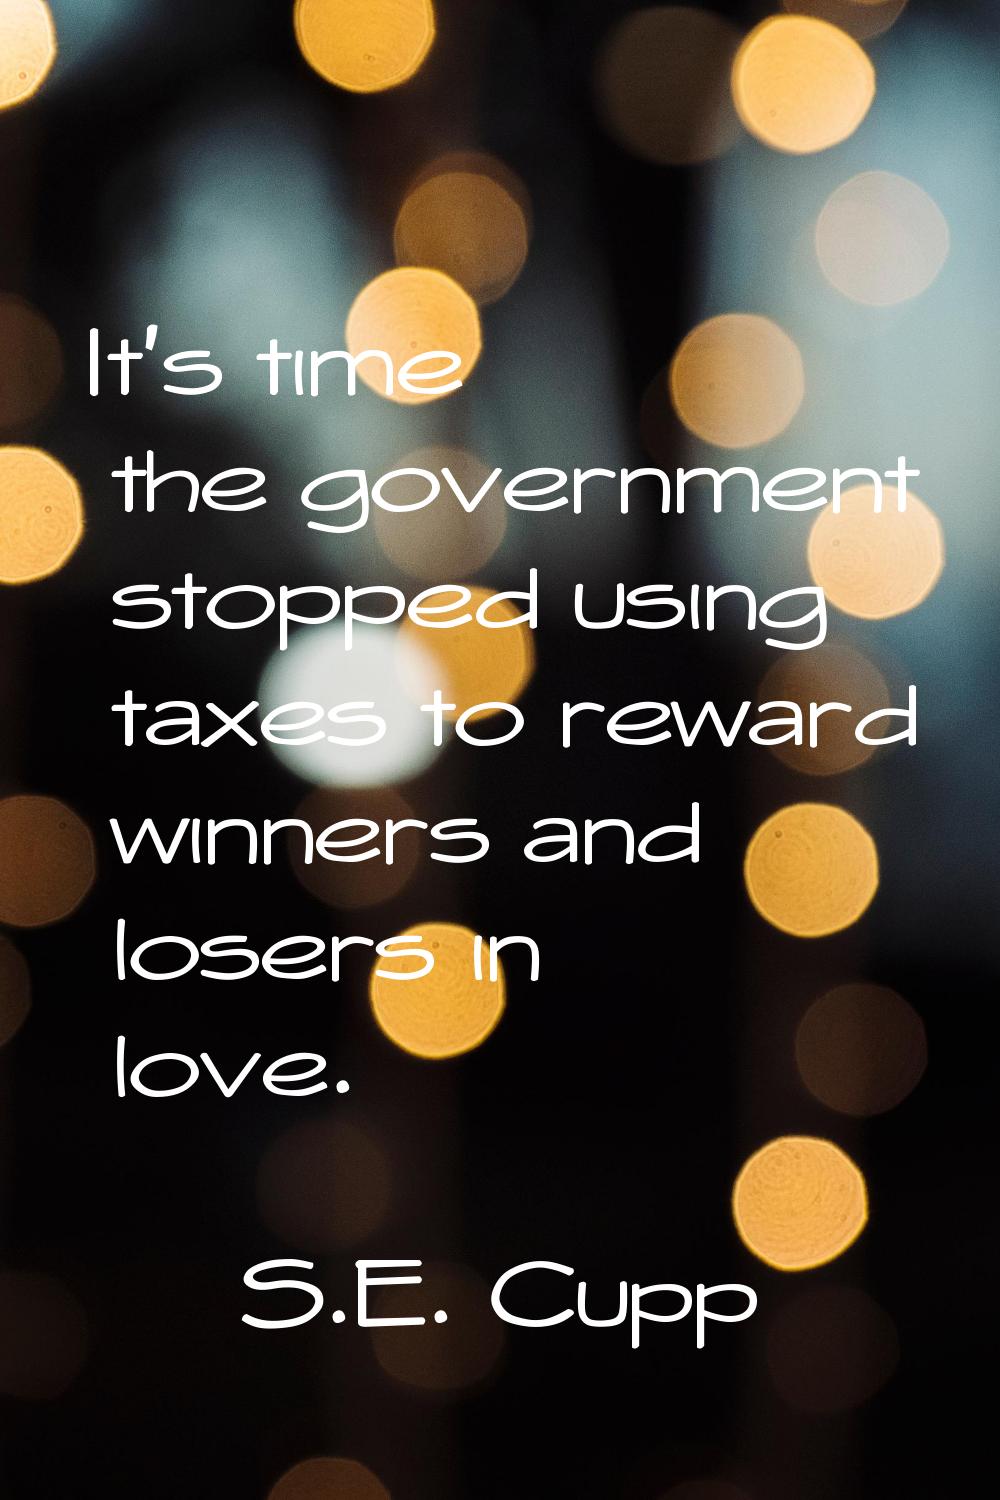 It's time the government stopped using taxes to reward winners and losers in love.